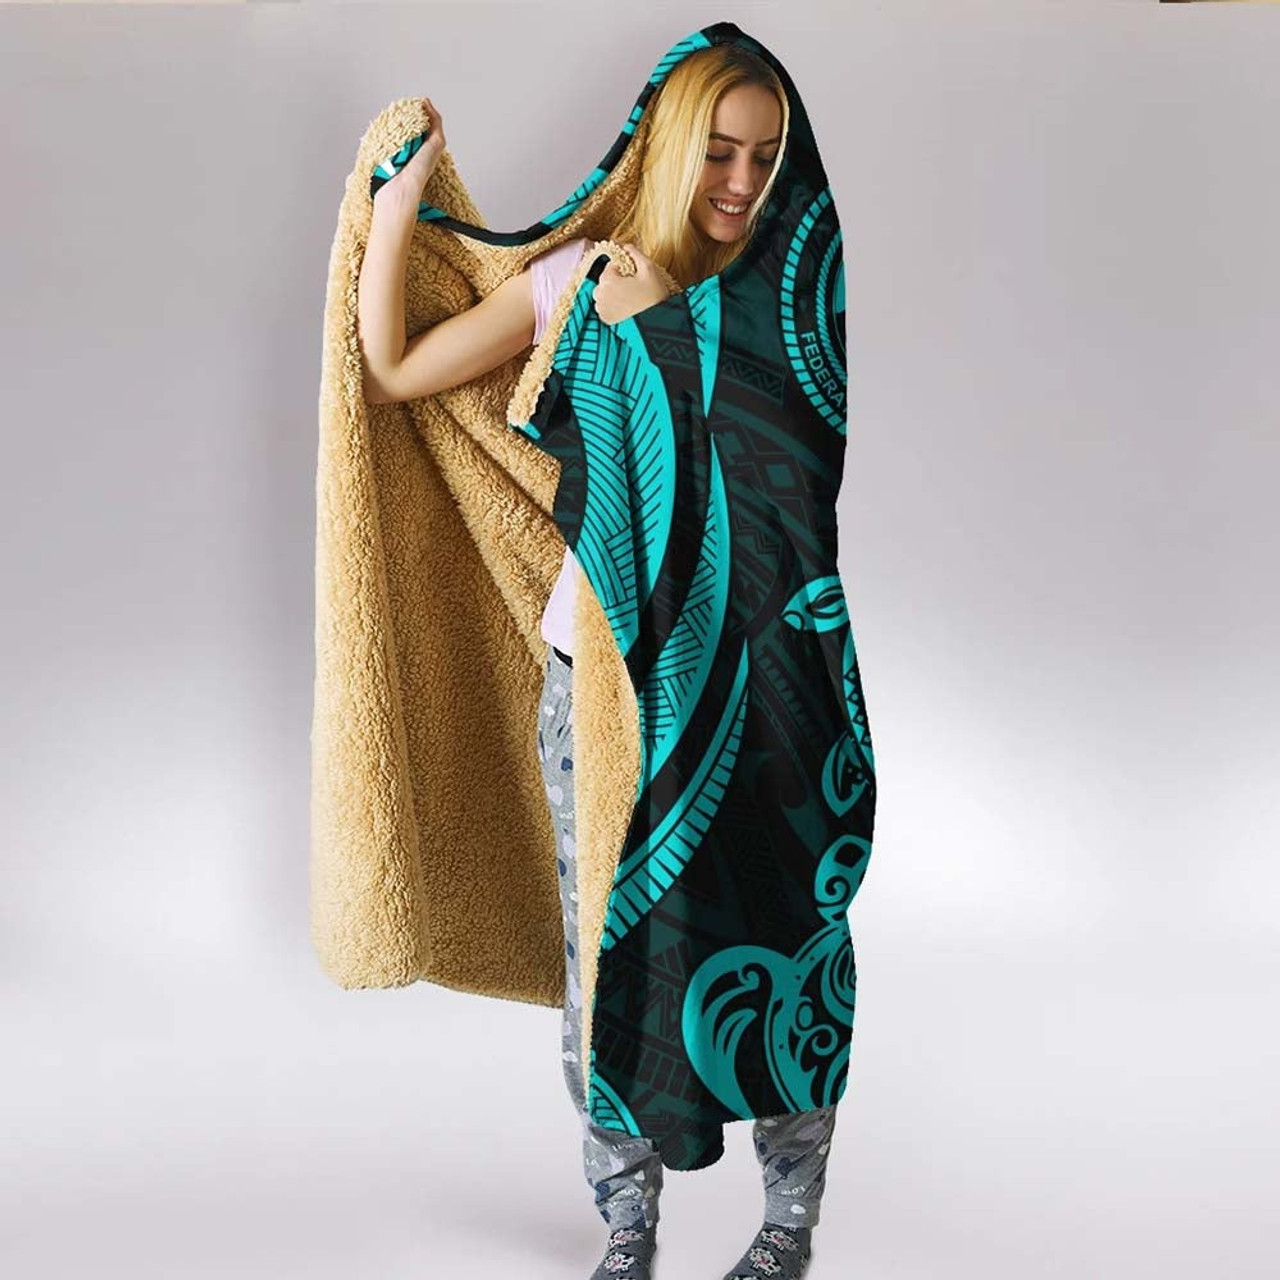 Federated States of Micronesia Hooded Blanket - Turquoise Tentacle Turtle 3